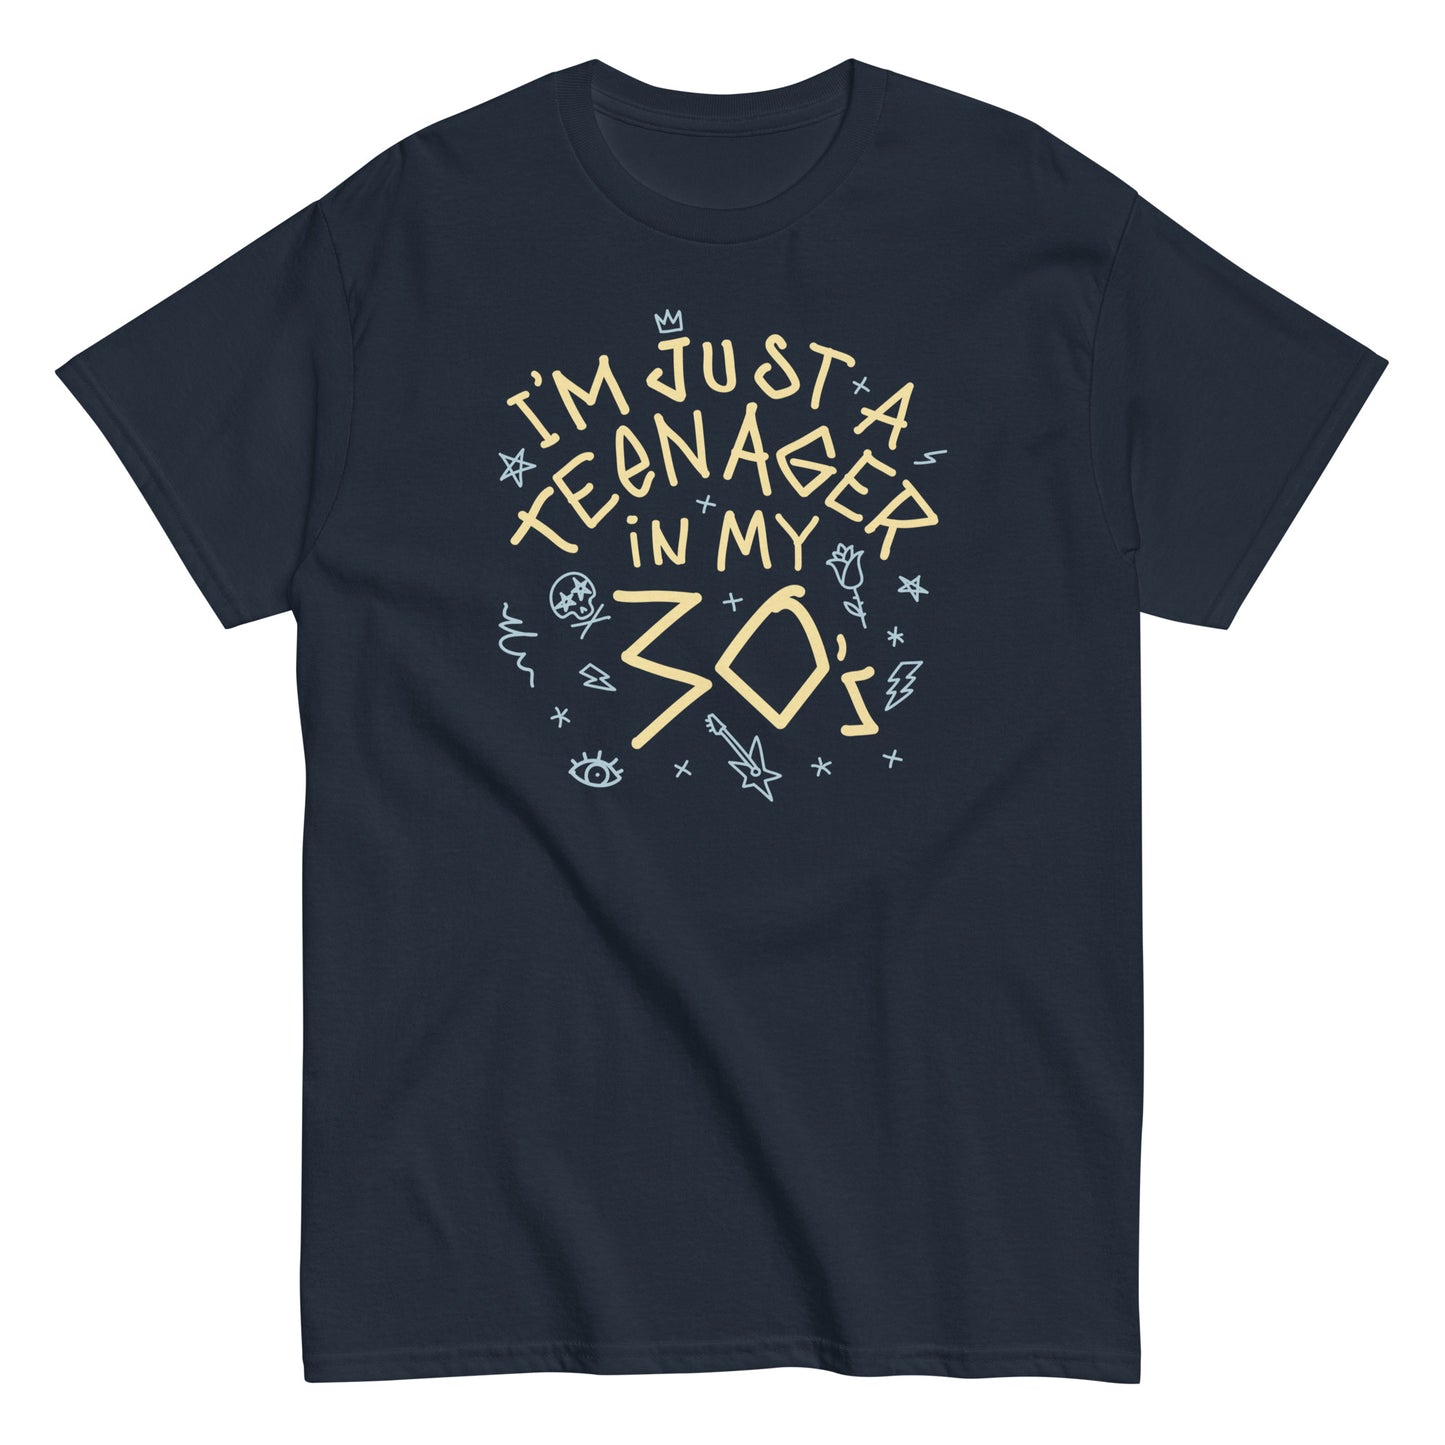 I'm Just A Teenager In My 30's Men's Classic Tee